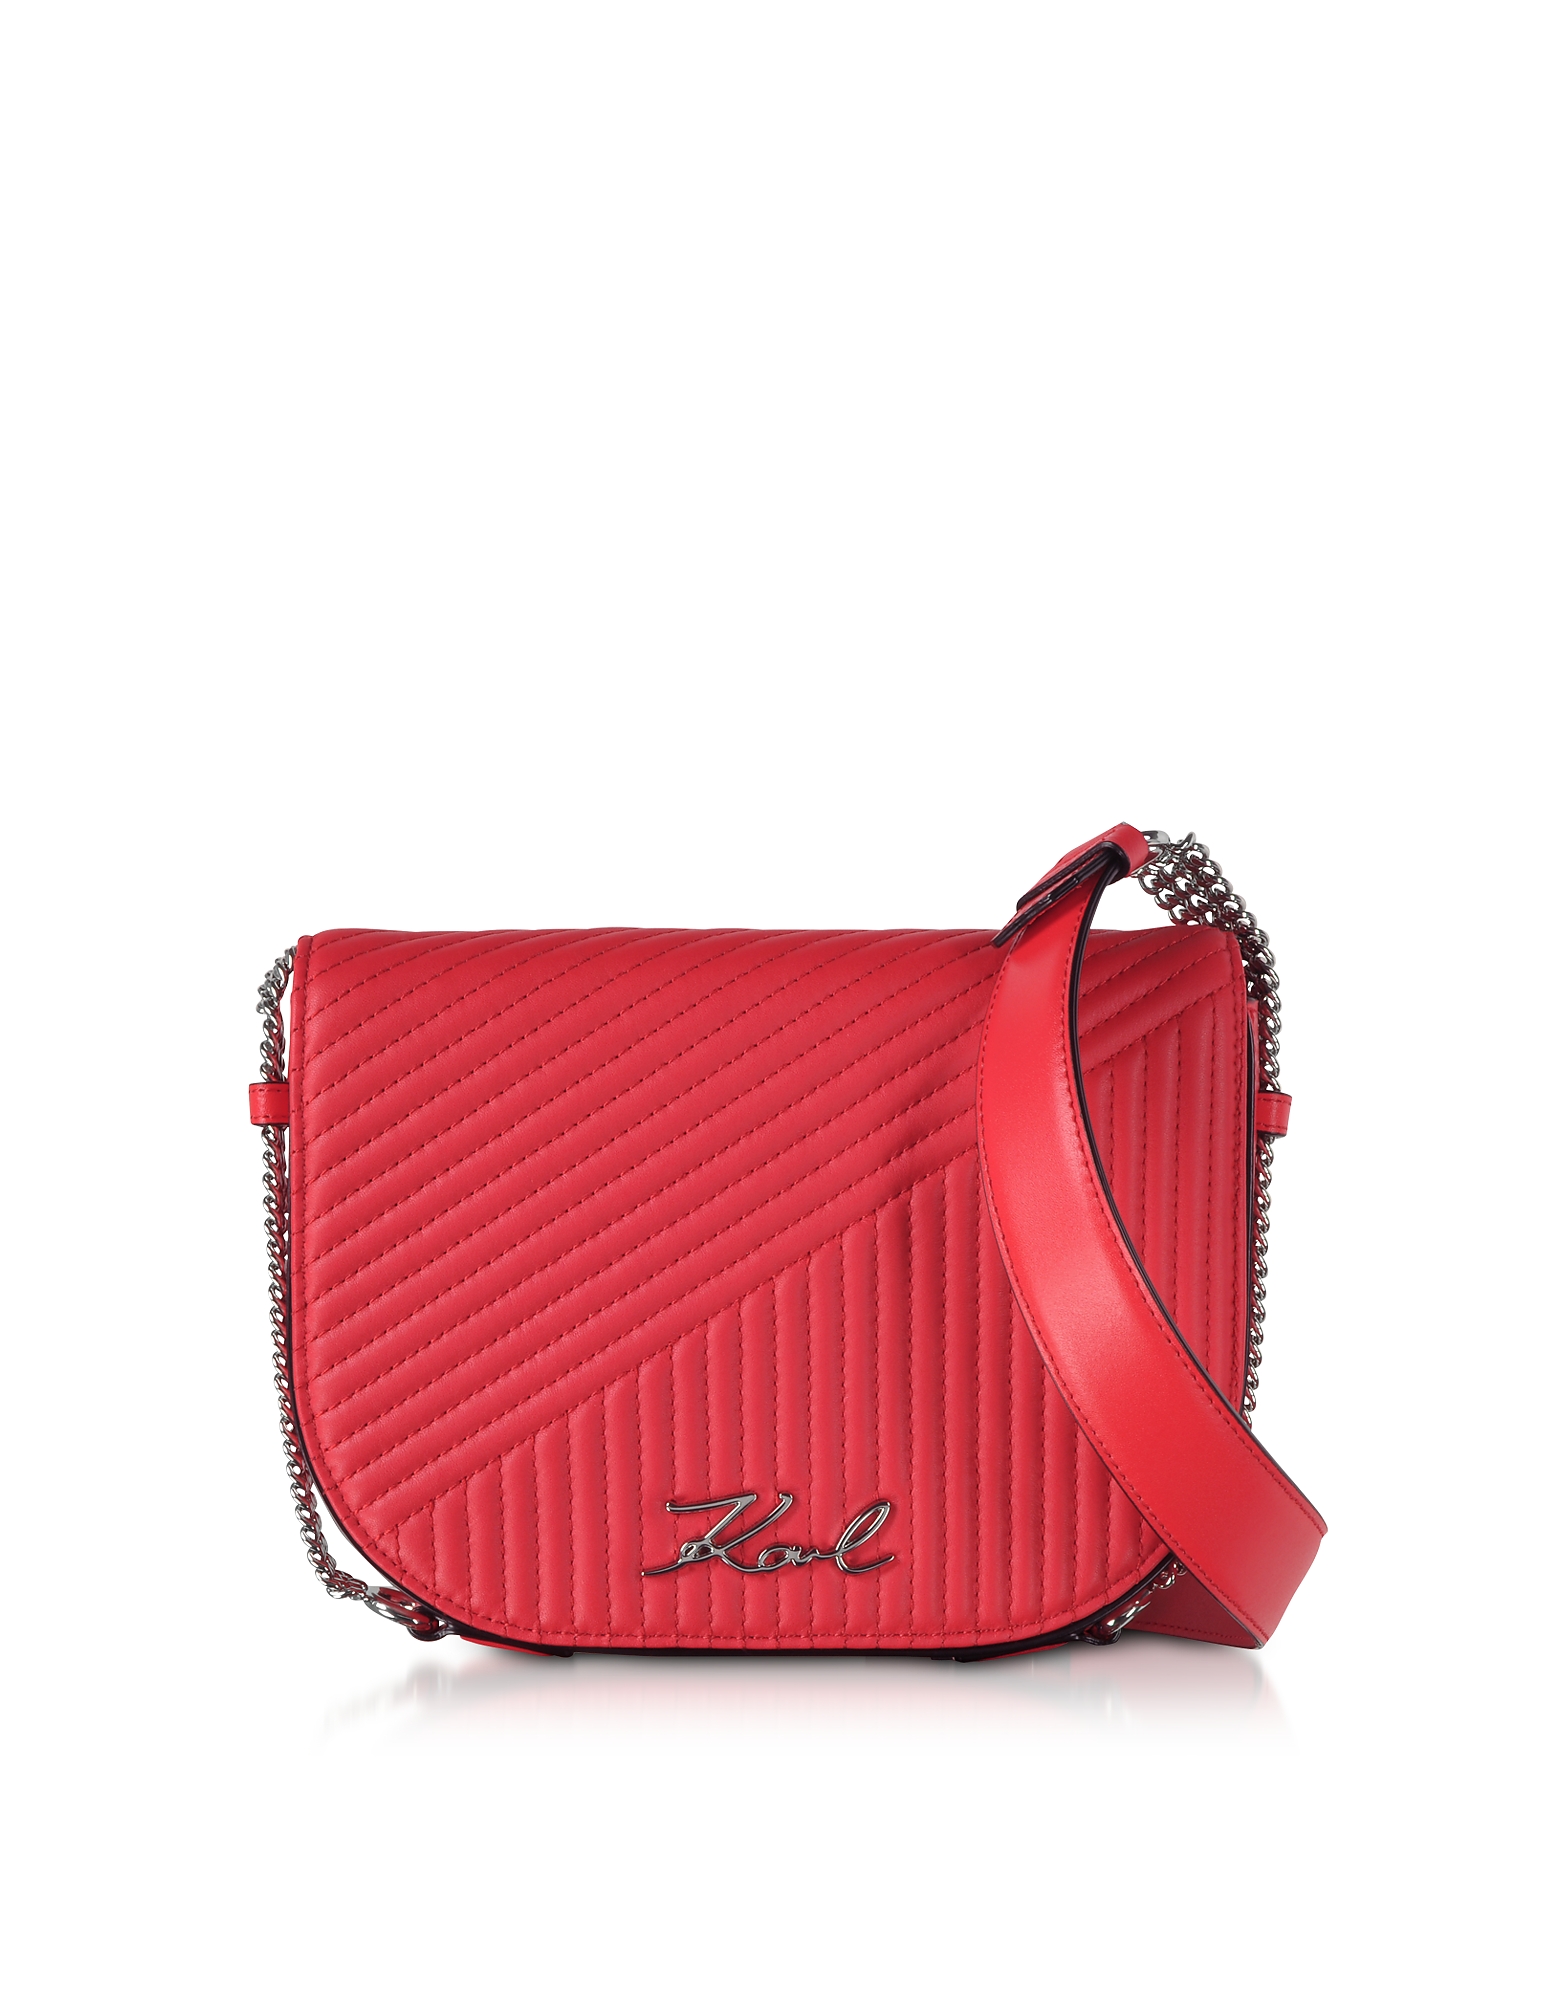 

K/Signature Fire Red Quilted Leather Shoulder Bag